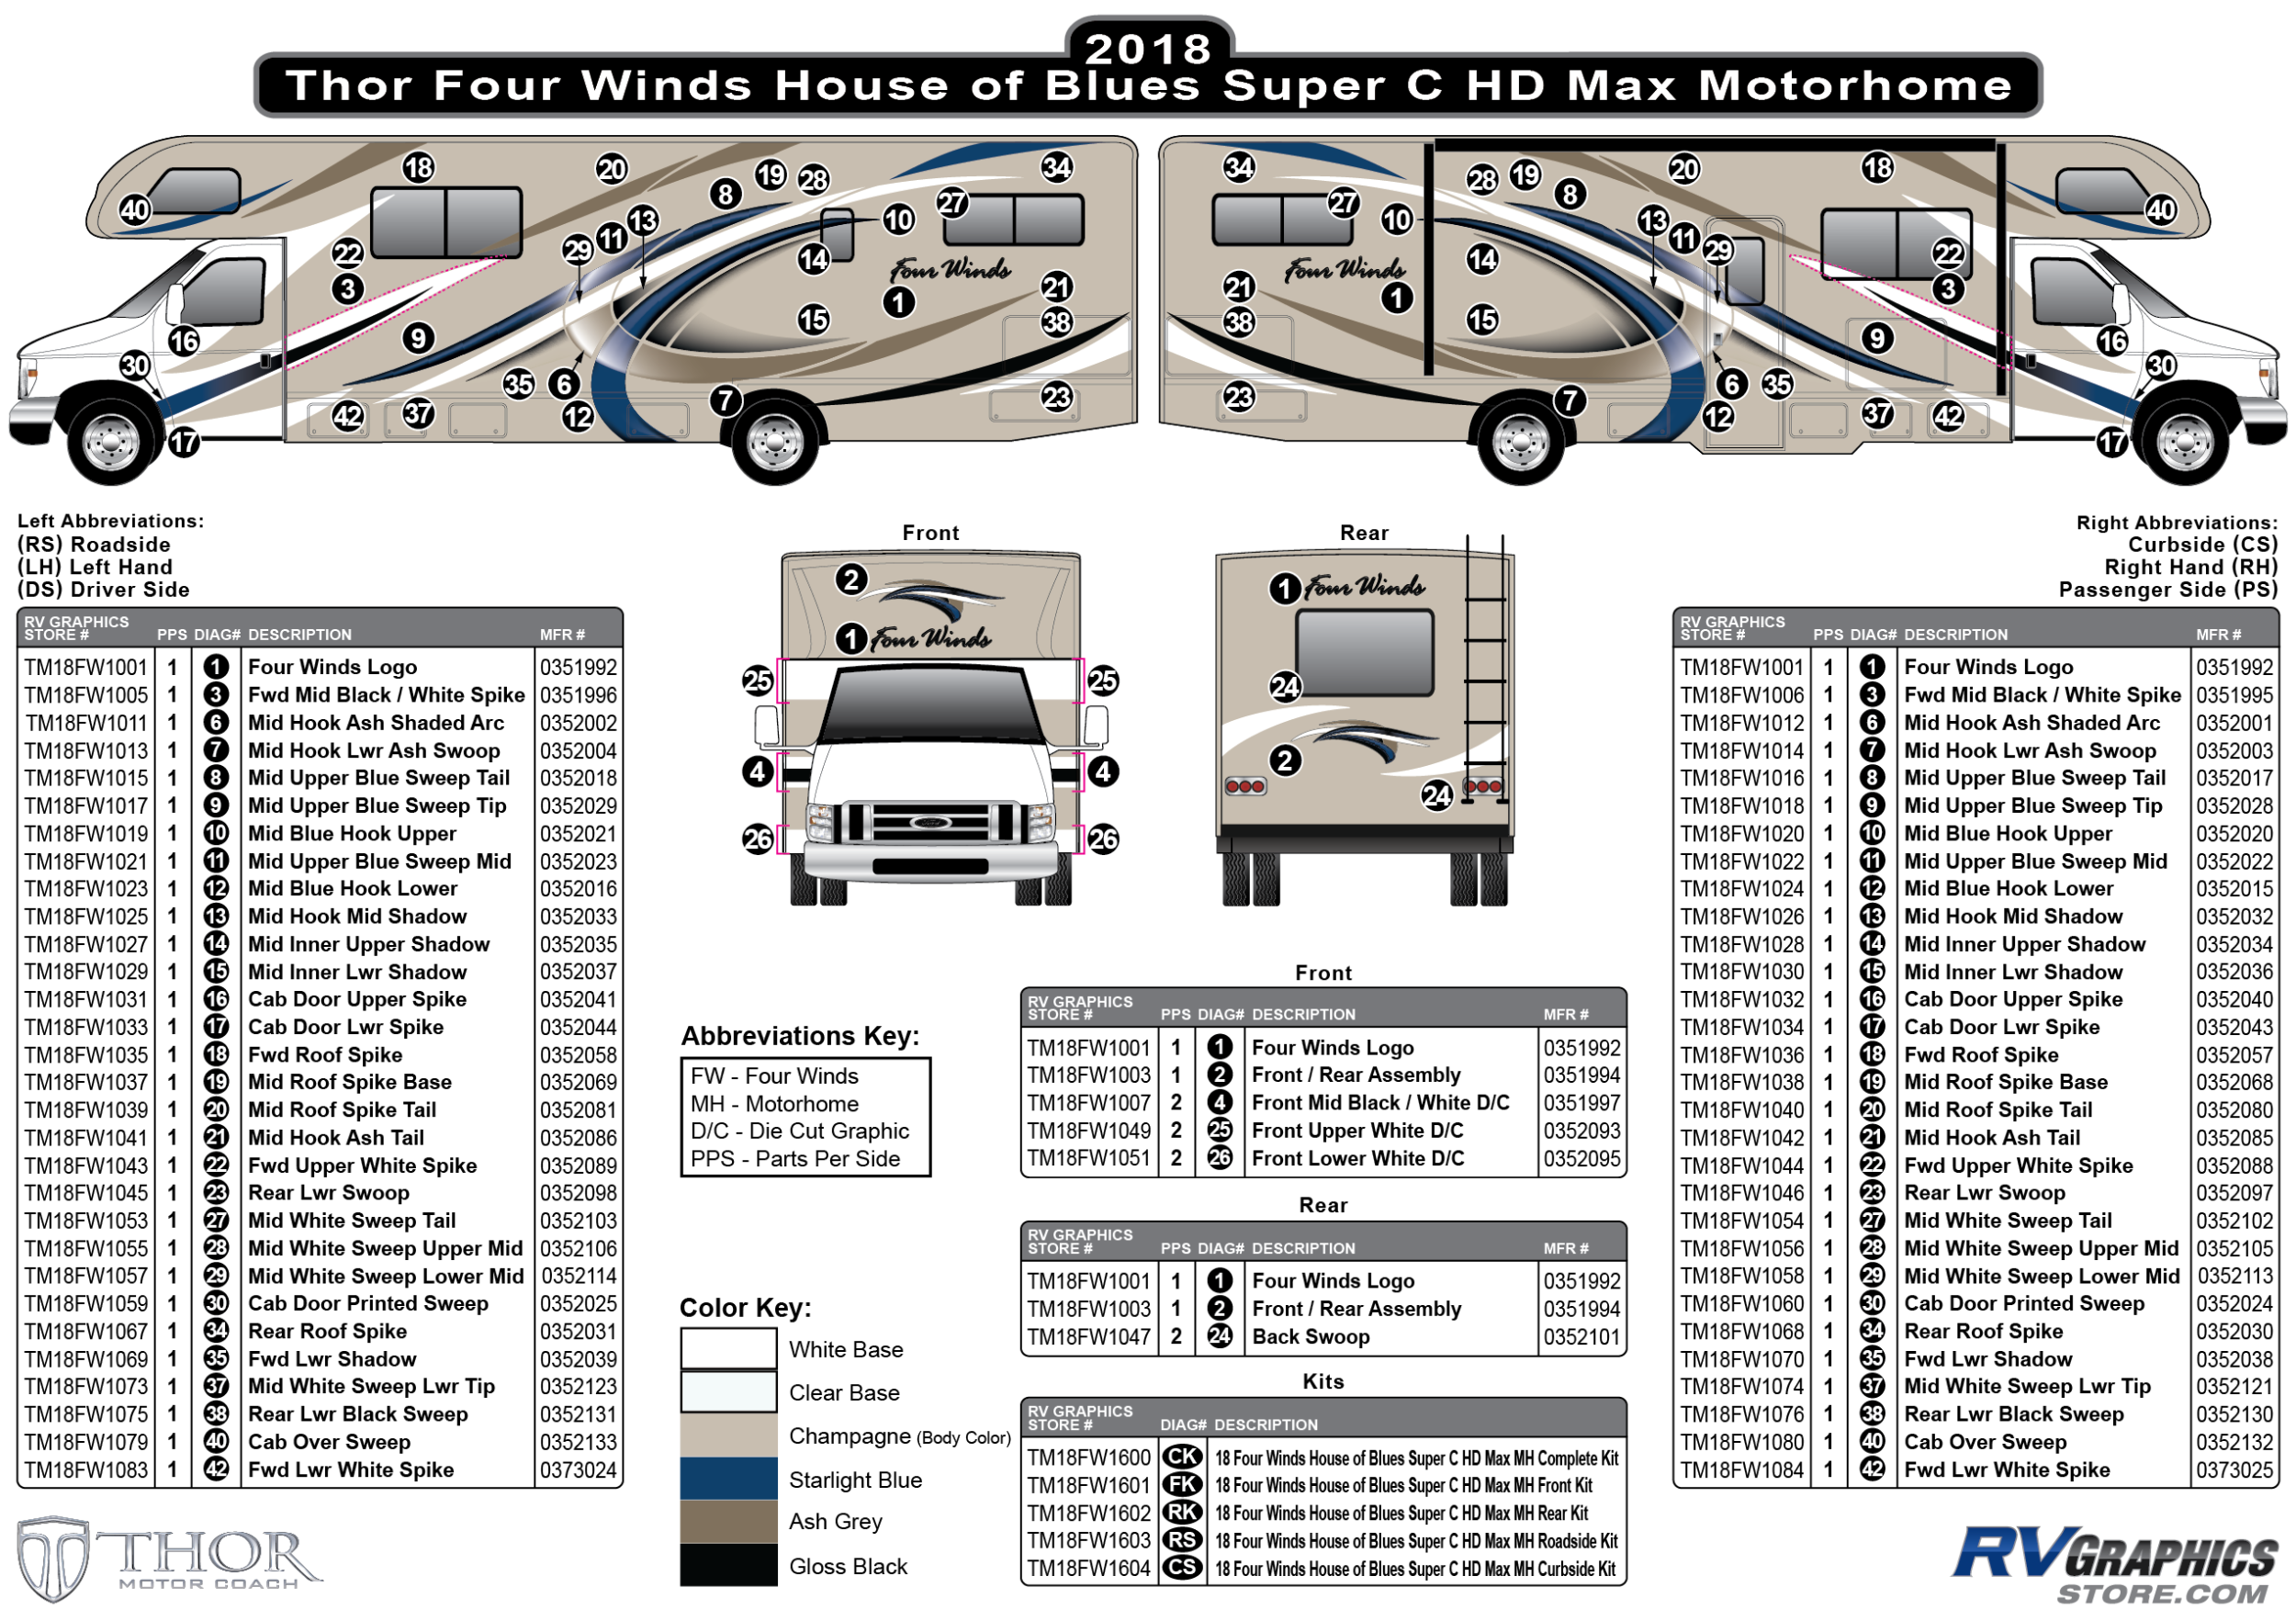 Four Winds - 2018 Four Winds MH-Motorhome HD Max House of Blues Tan Body